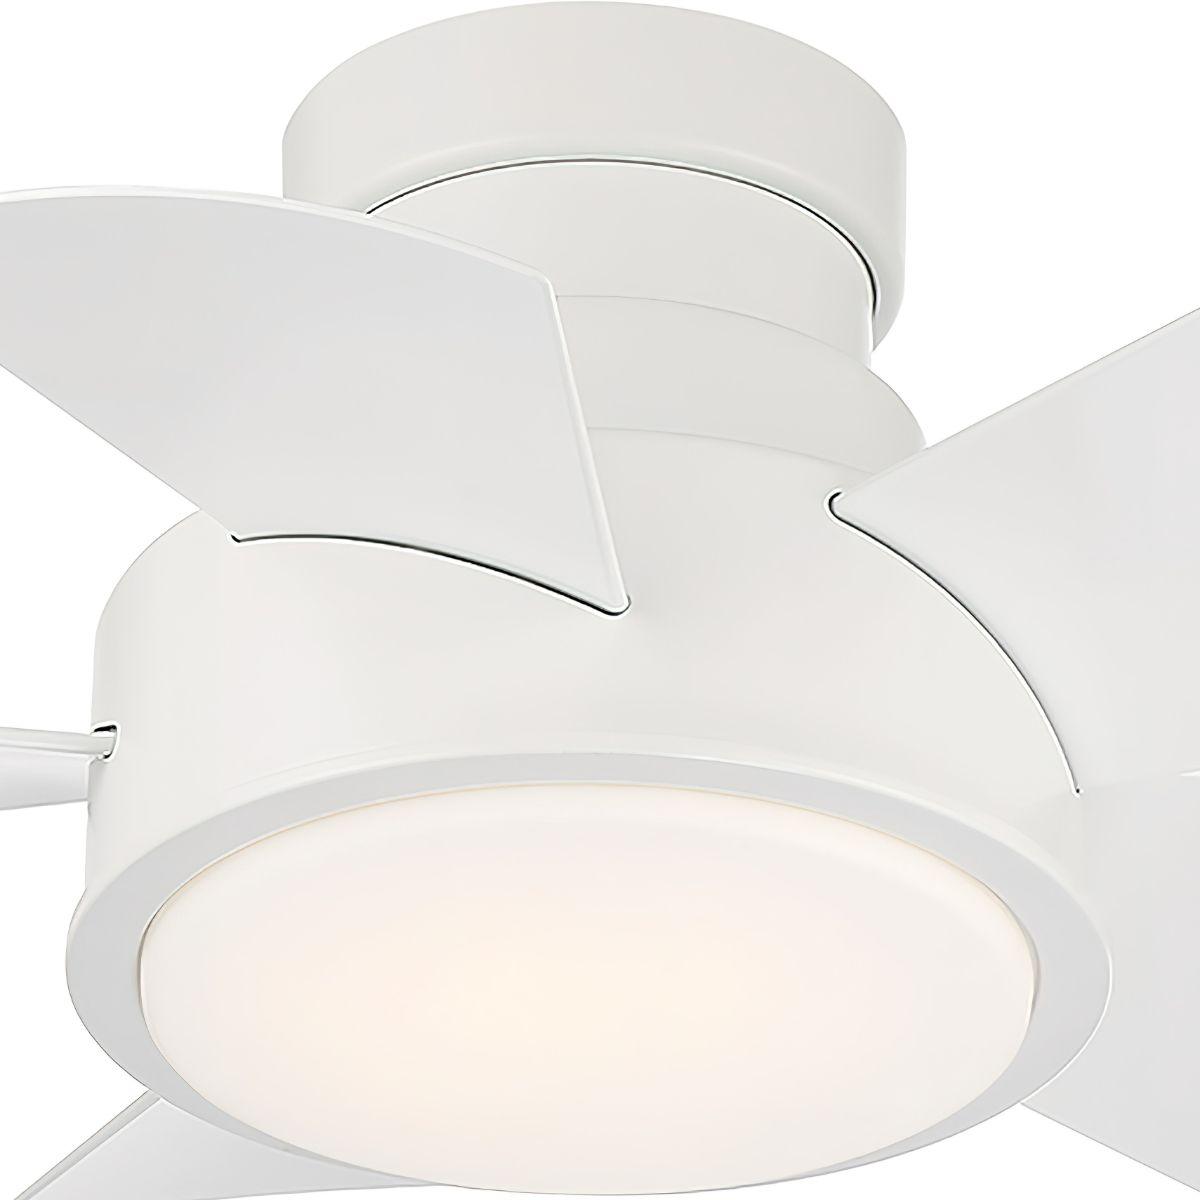 Vox 26 Inch Modern Outdoor Smart Ceiling Fan With Light And Remote, Matte White Finish